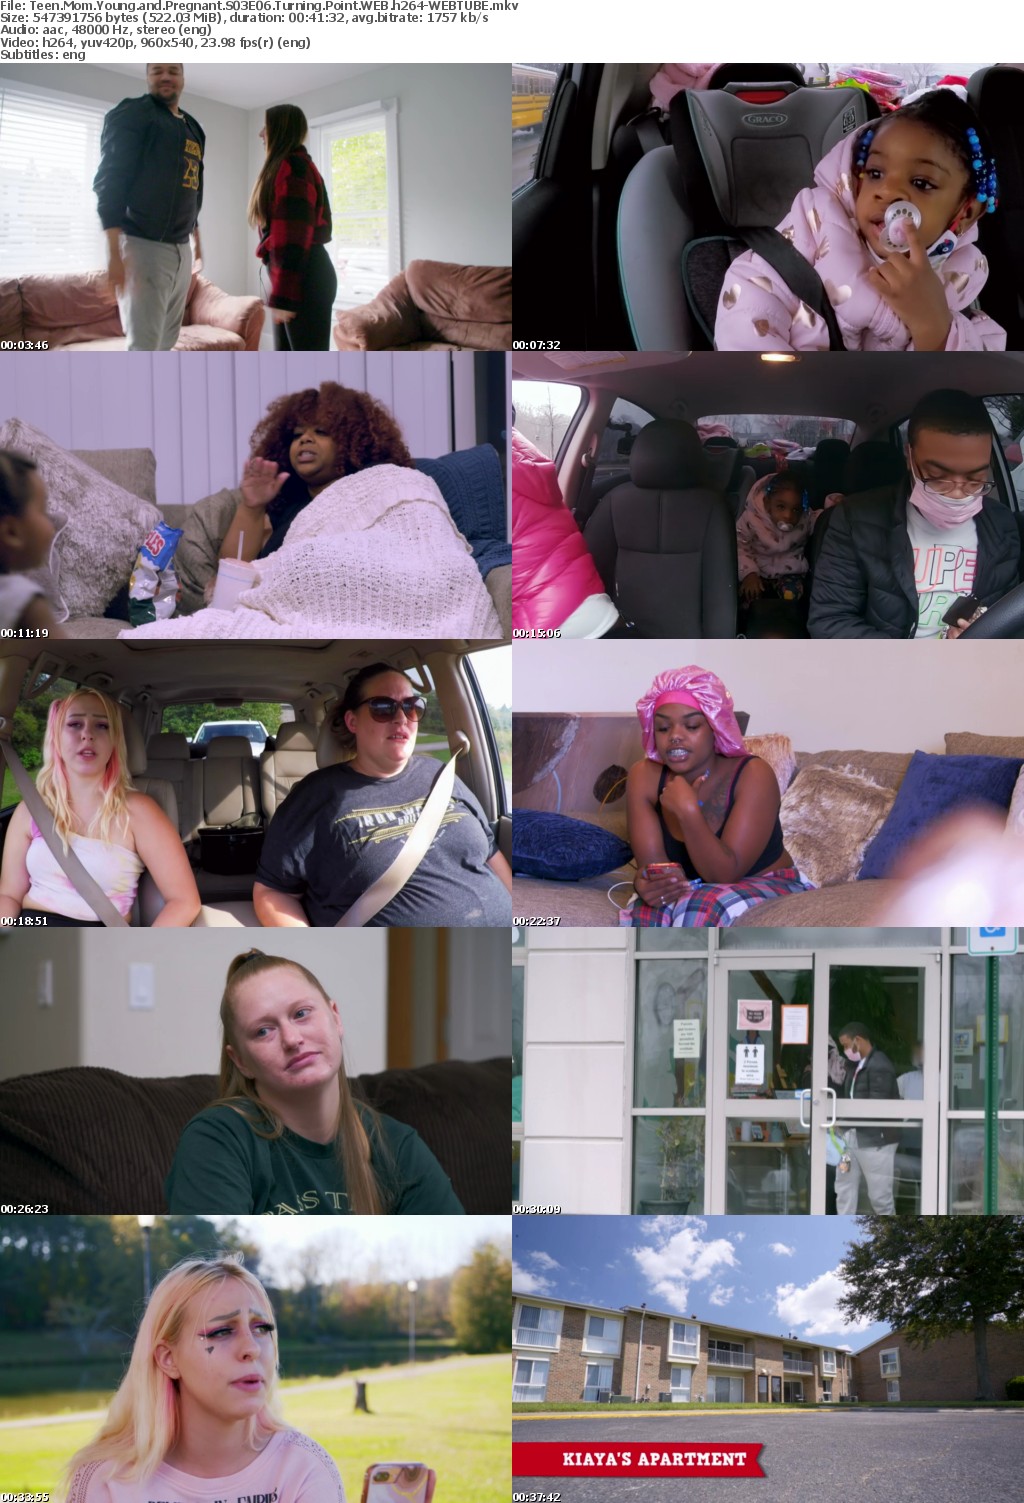 Teen Mom Young and Pregnant S03E06 Turning Point WEB h264-WEBTUBE